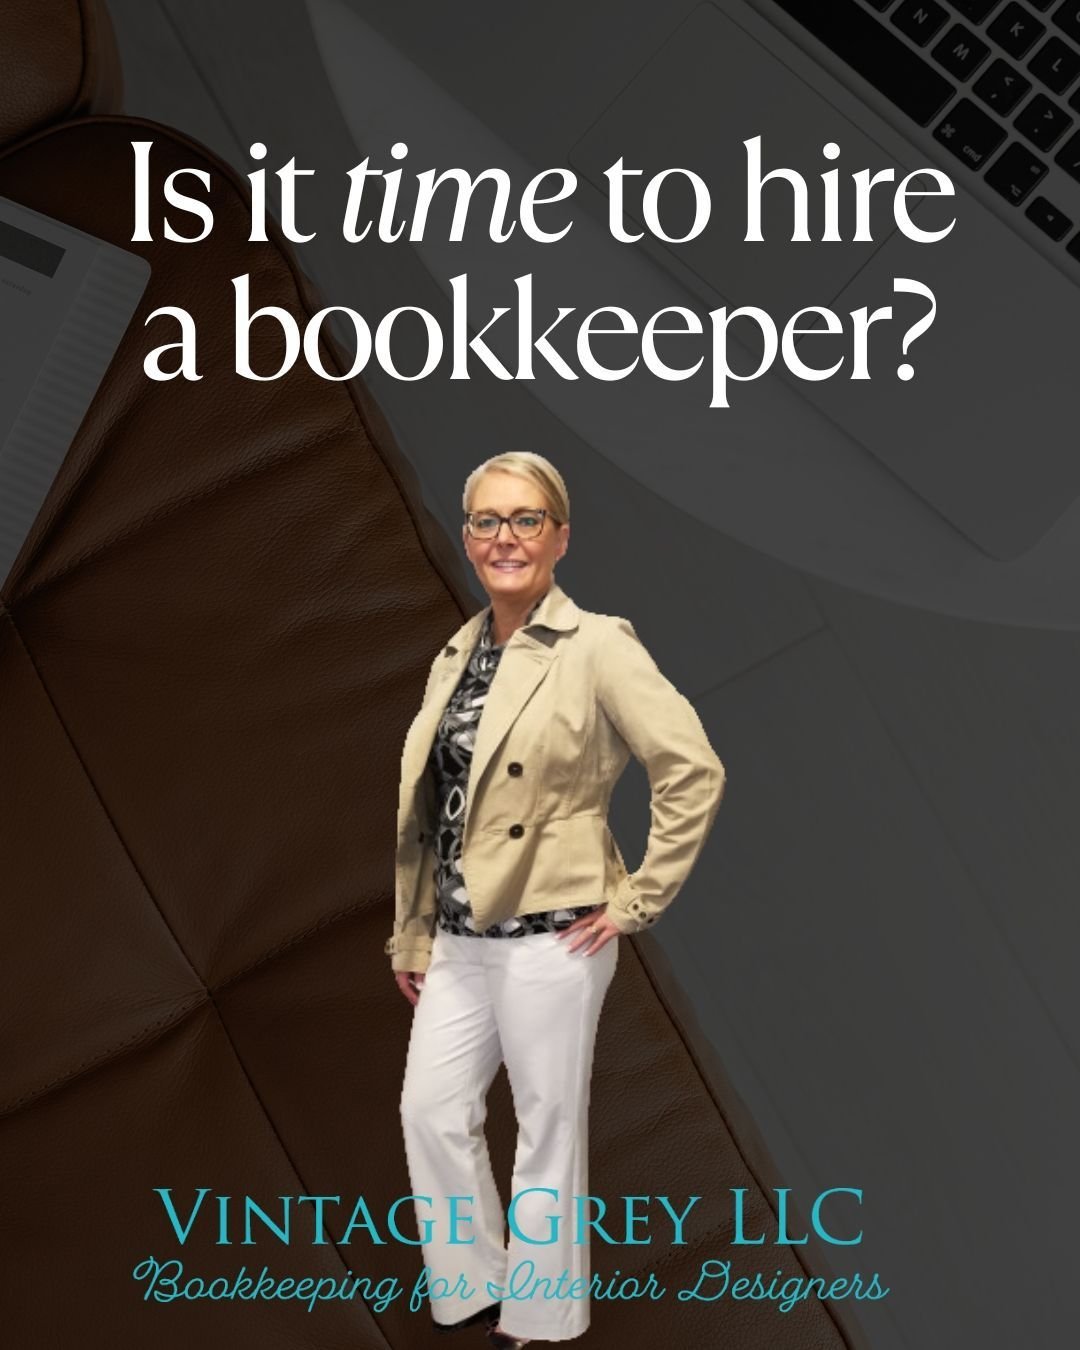 If you run an interior design business you need a bookkeeper.

It's up to you whether you want to BE the bookkeeper or hire a bookkeeper... but the bottom line is bookkeeping is an essential business function!

Even if you're just starting your inter